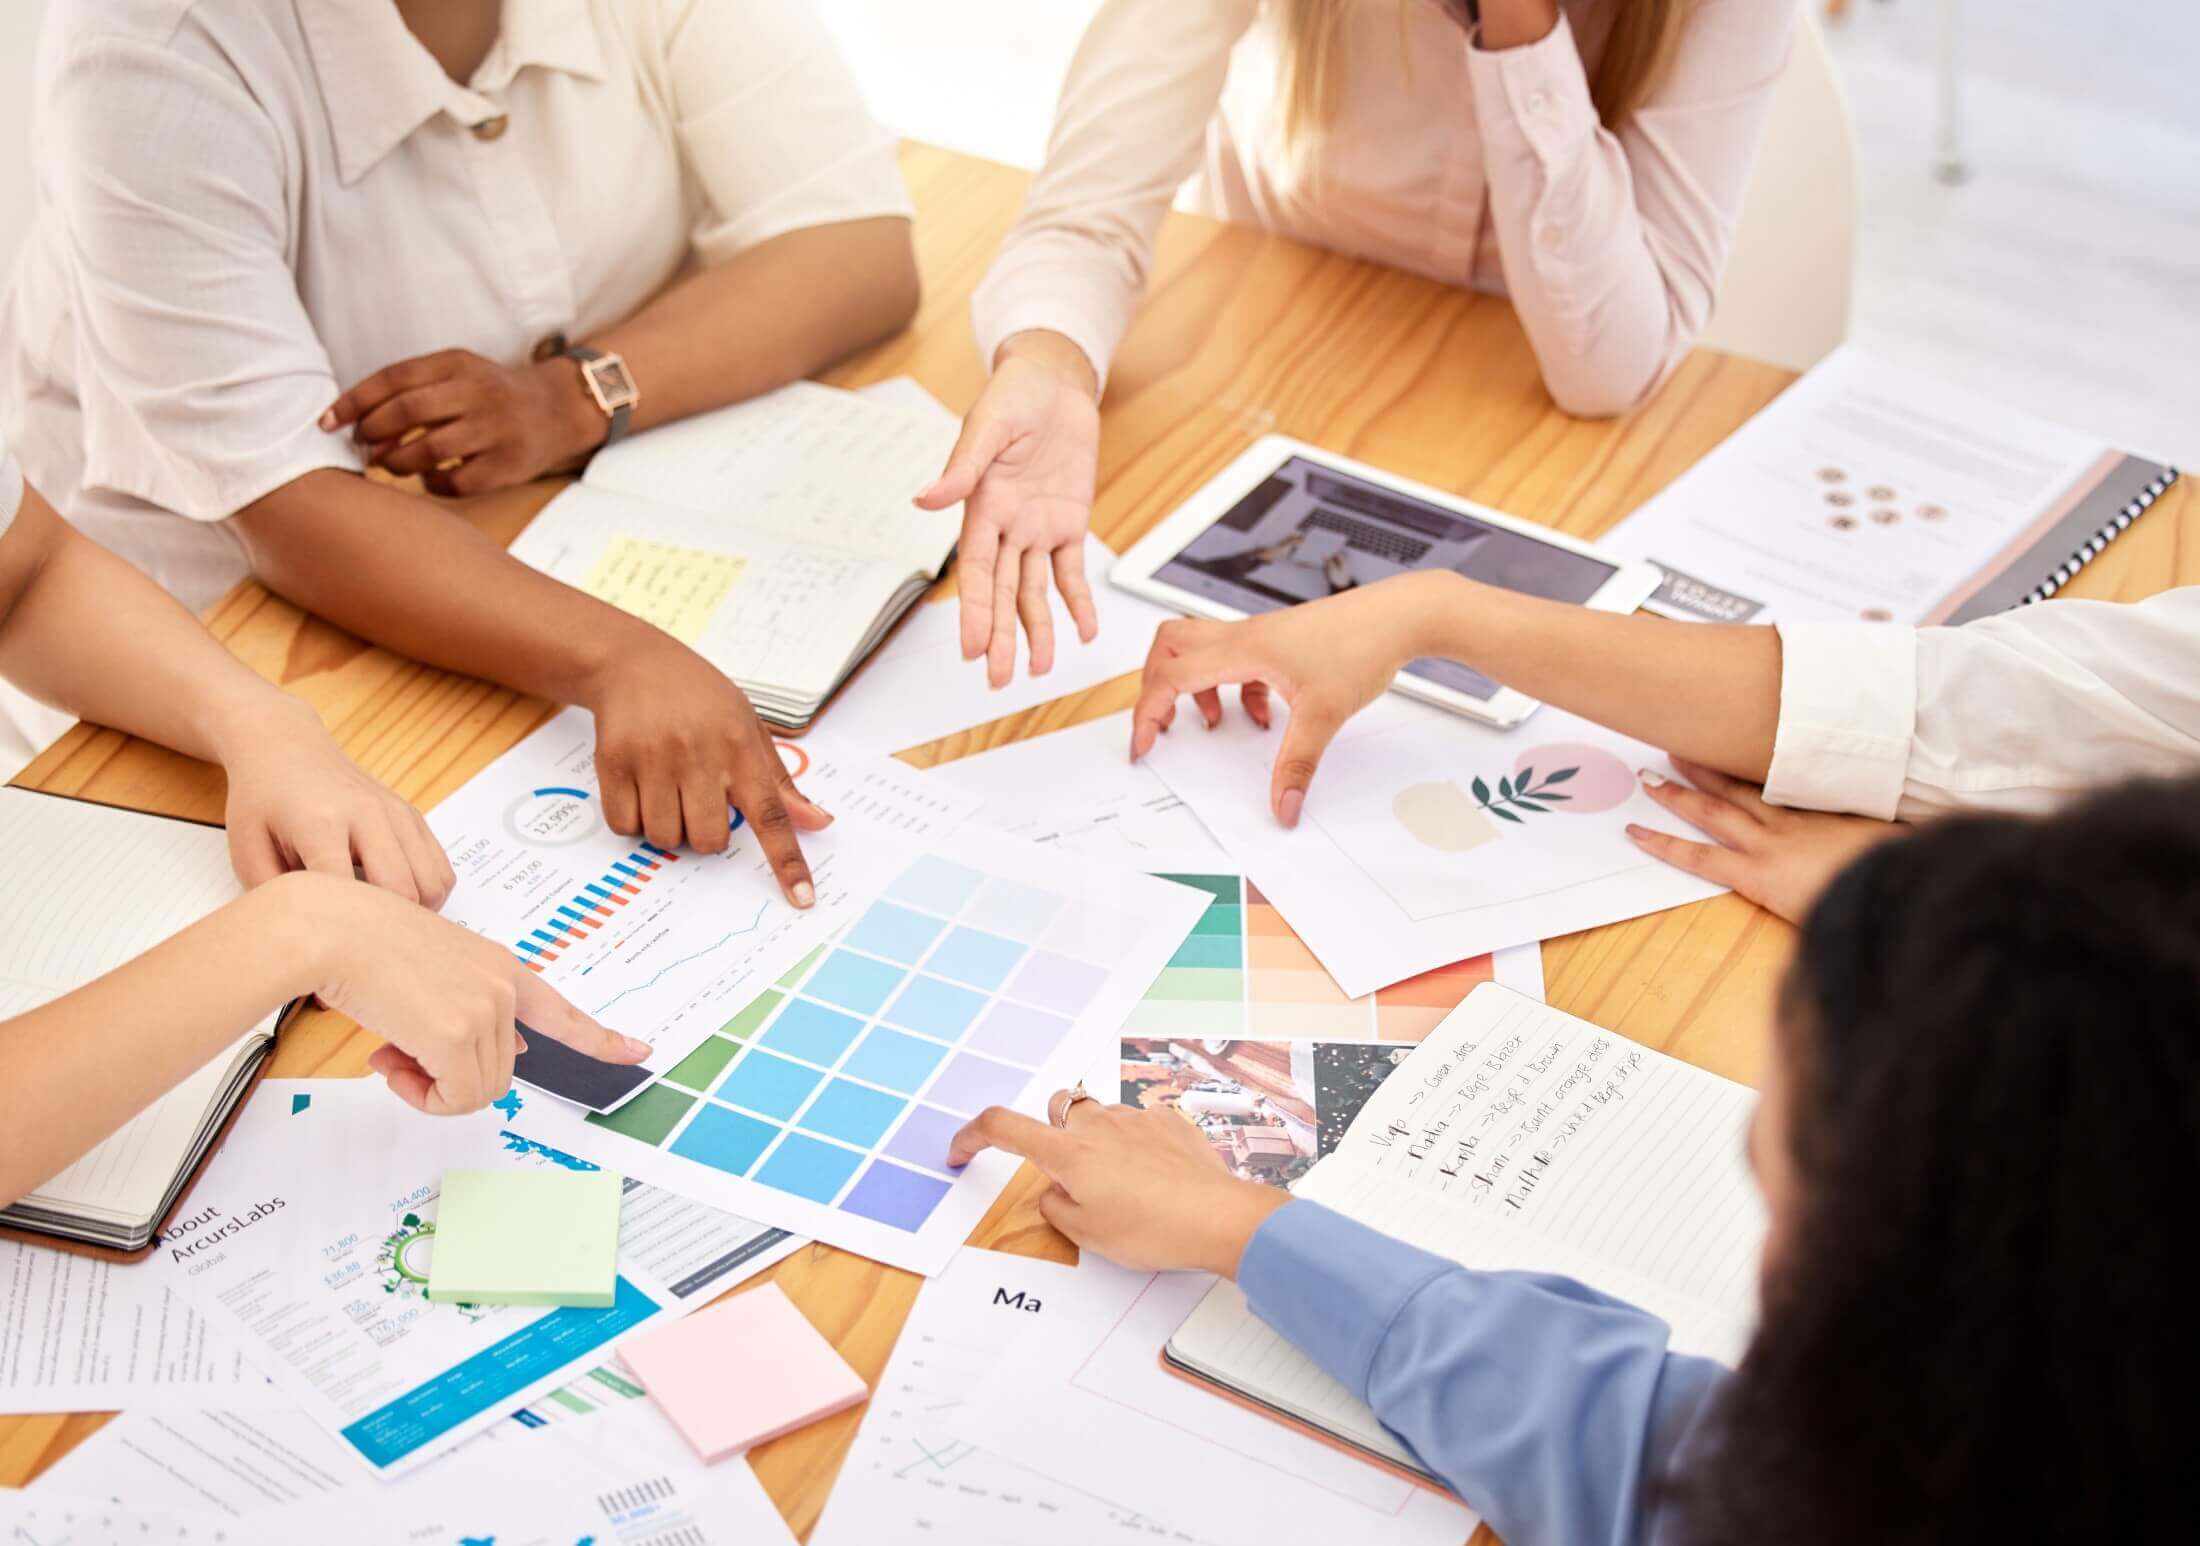 An image featuring a team of designers gathered around a table in a bright office space, discussing branding elements and logo designs, indicated by the various charts and color palettes on the table.